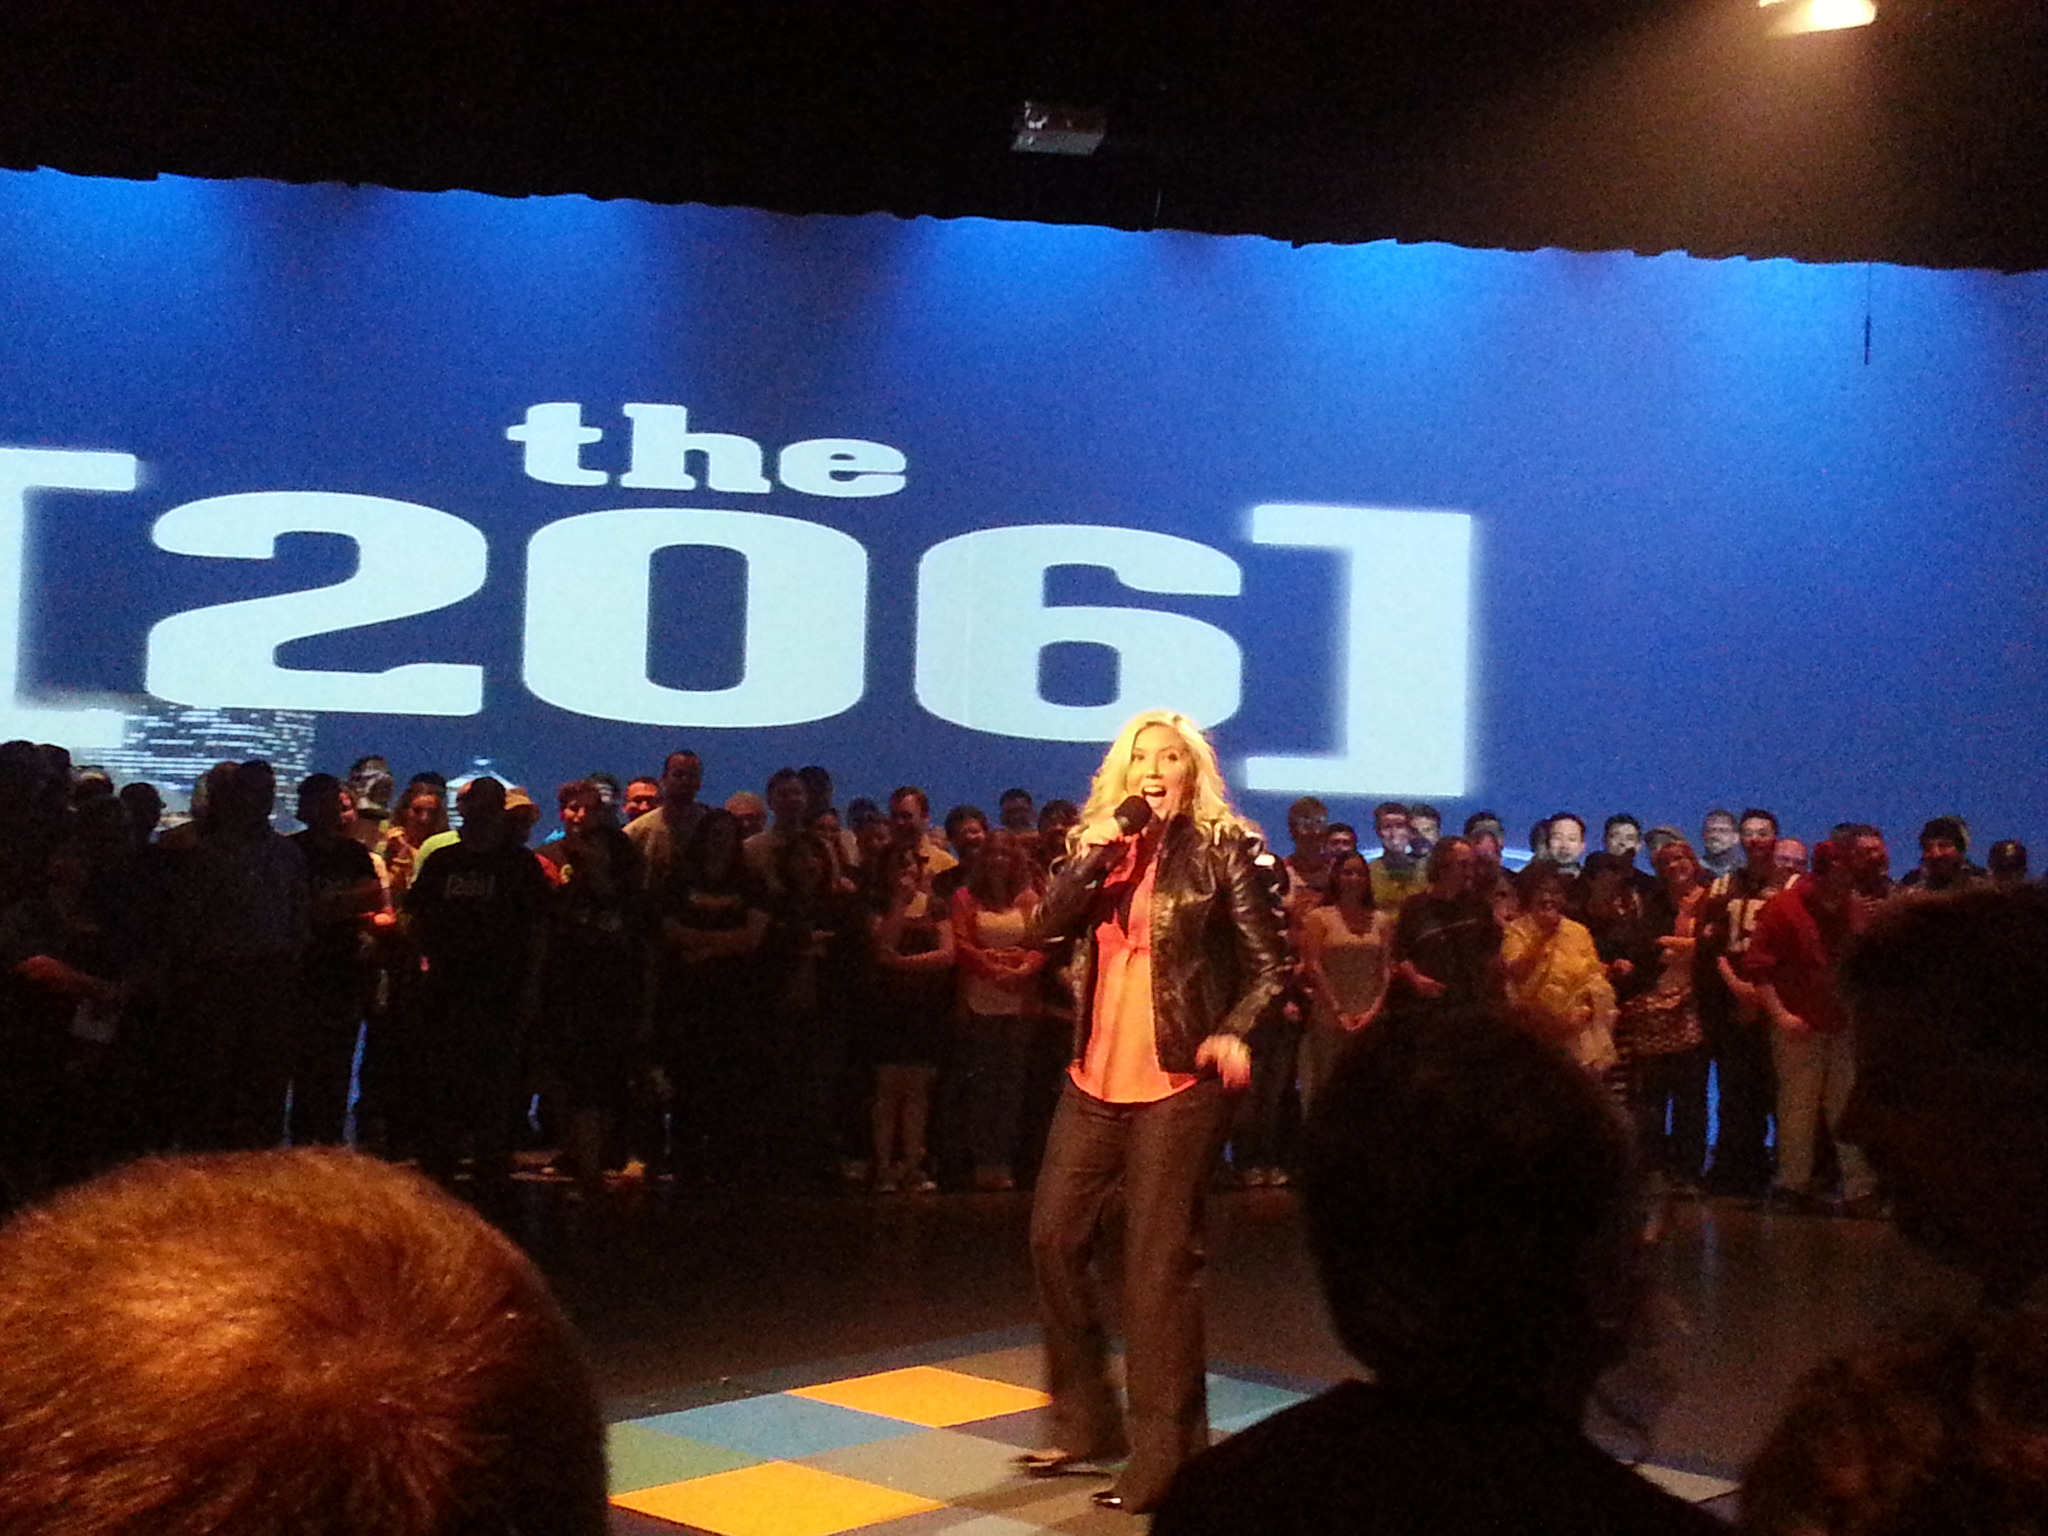 Michelle Westford at The 206 taping.